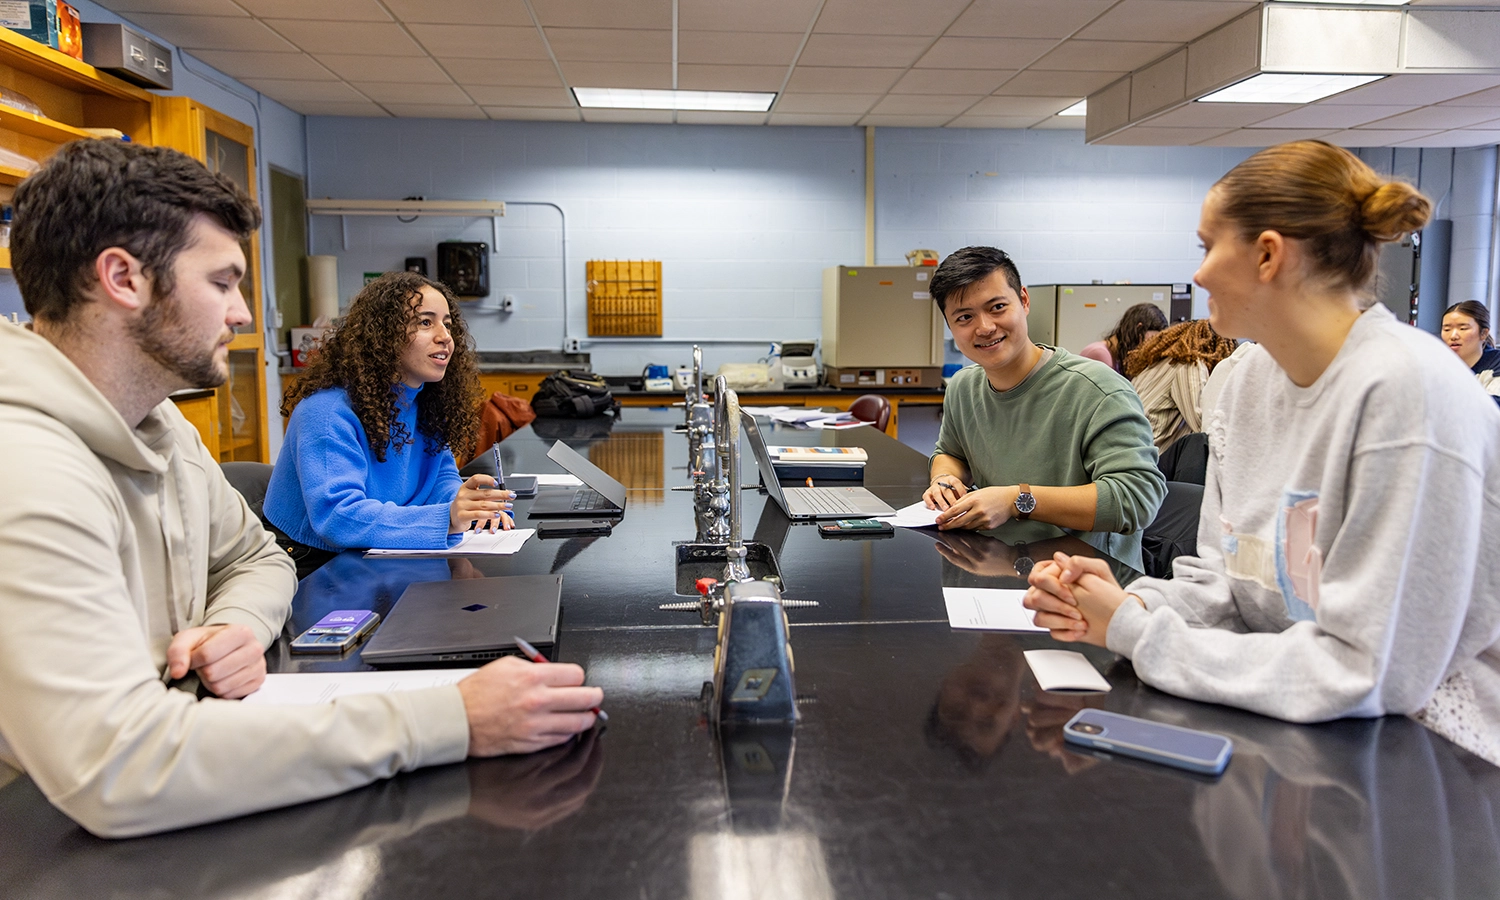 Jack Hodge ’24, Malak Fadlou-Allah ’24, Cameron Guan ’24 and Fiona Horan ’24 work on a group project during “Genomics” with Associate Professor of Biology Shannon Straub.